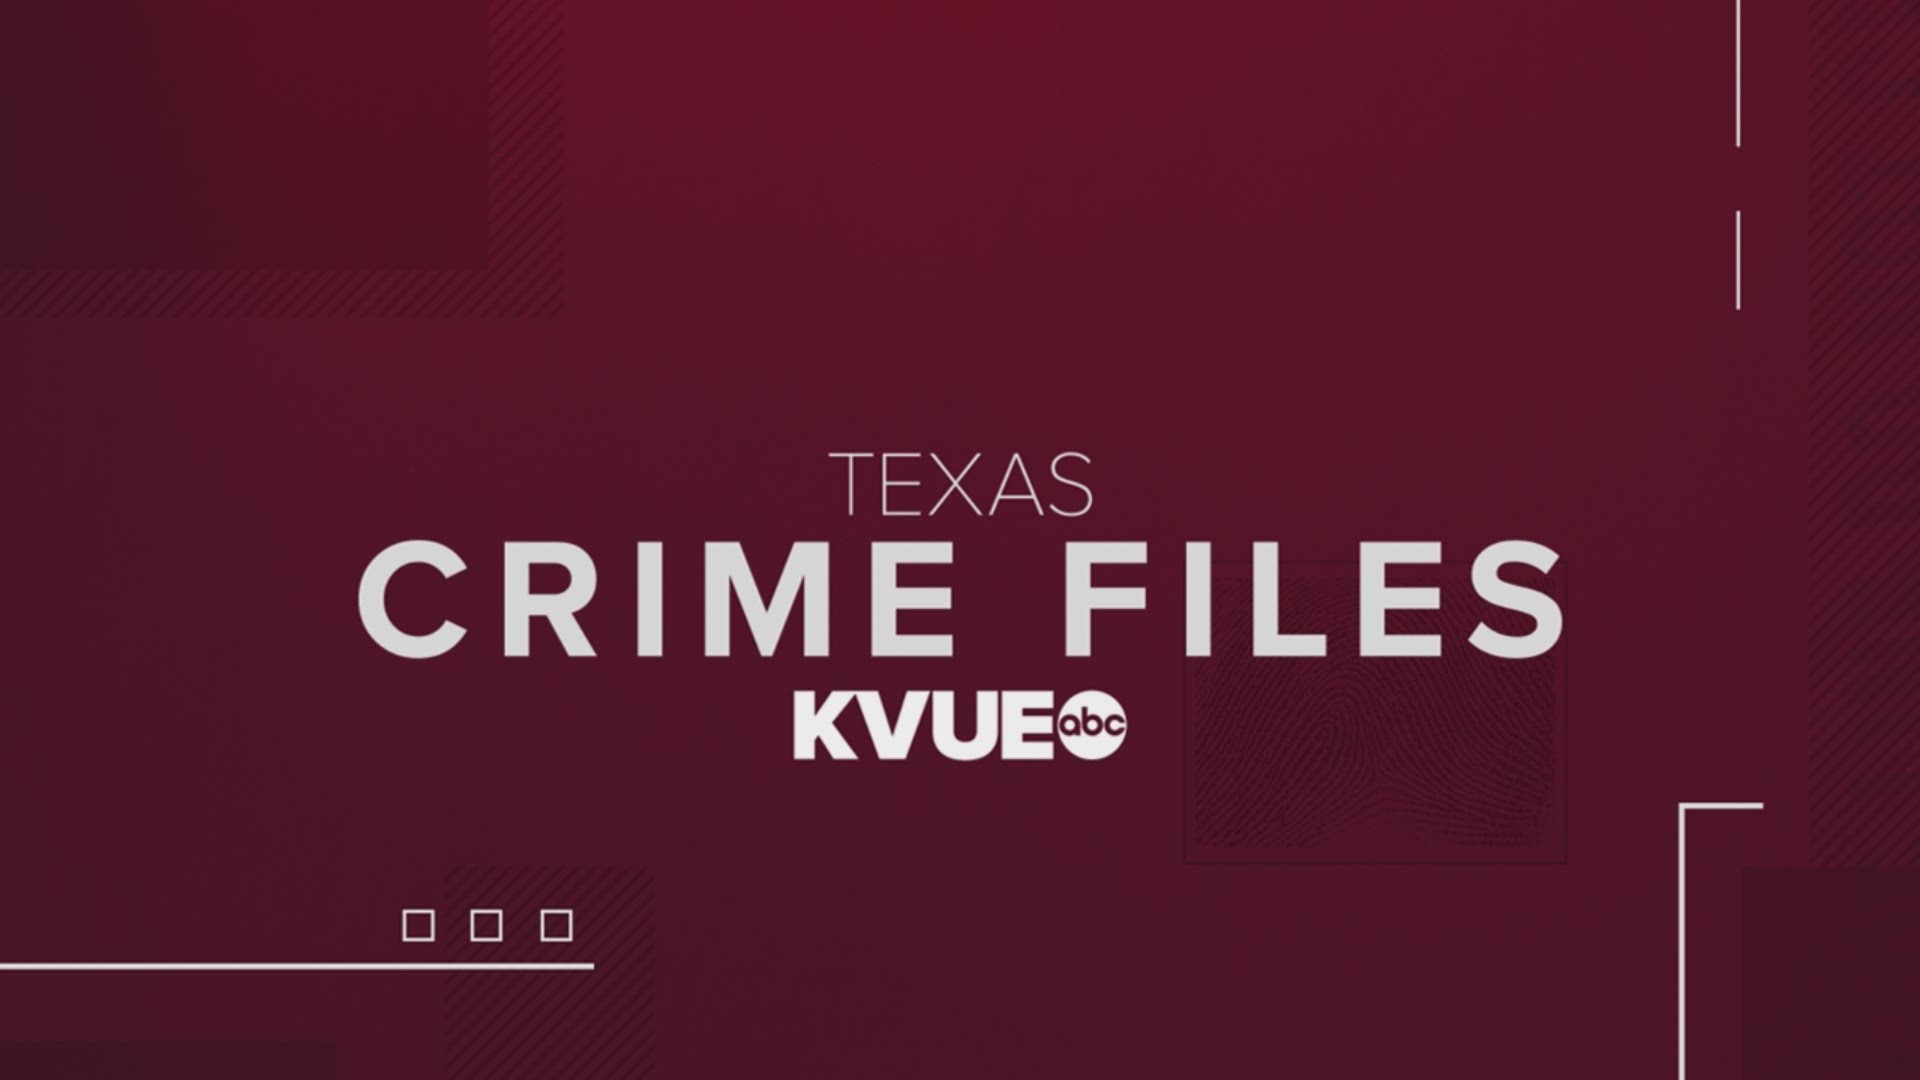 On Friday November 15th, the Texas Court of Criminal Appeals blocked Reed’s execution. In episode 4, KVUE's Senior Reporter, Tony Plohetski, talks about what's next.